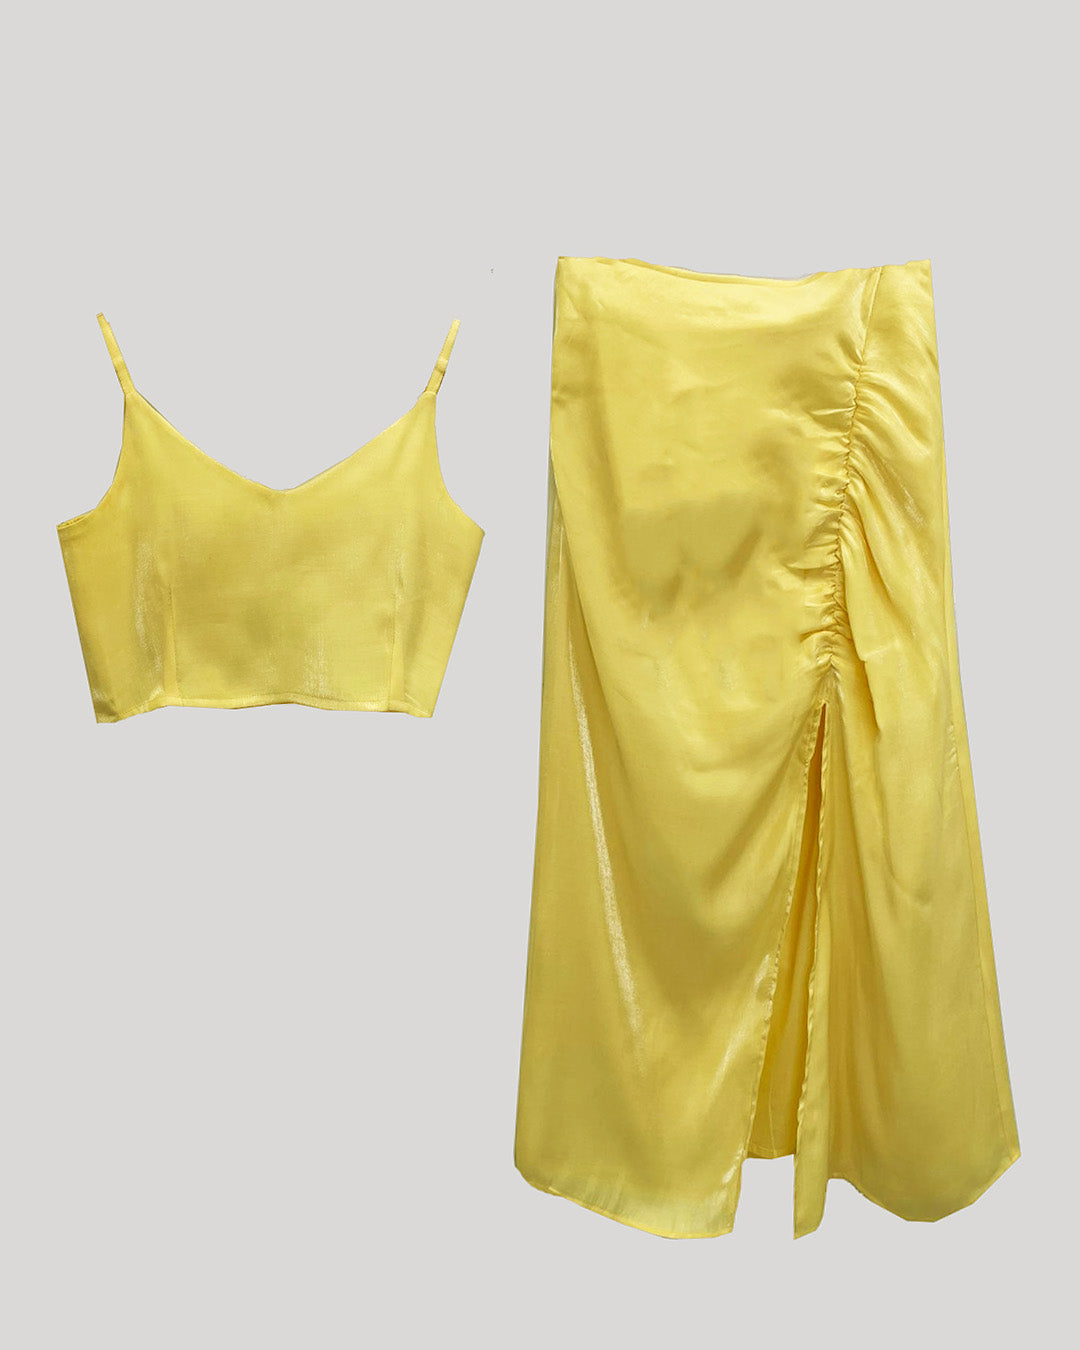 YELLOW SATIN SKIRT AND TOP COORD SET WITH FRONT SLIT